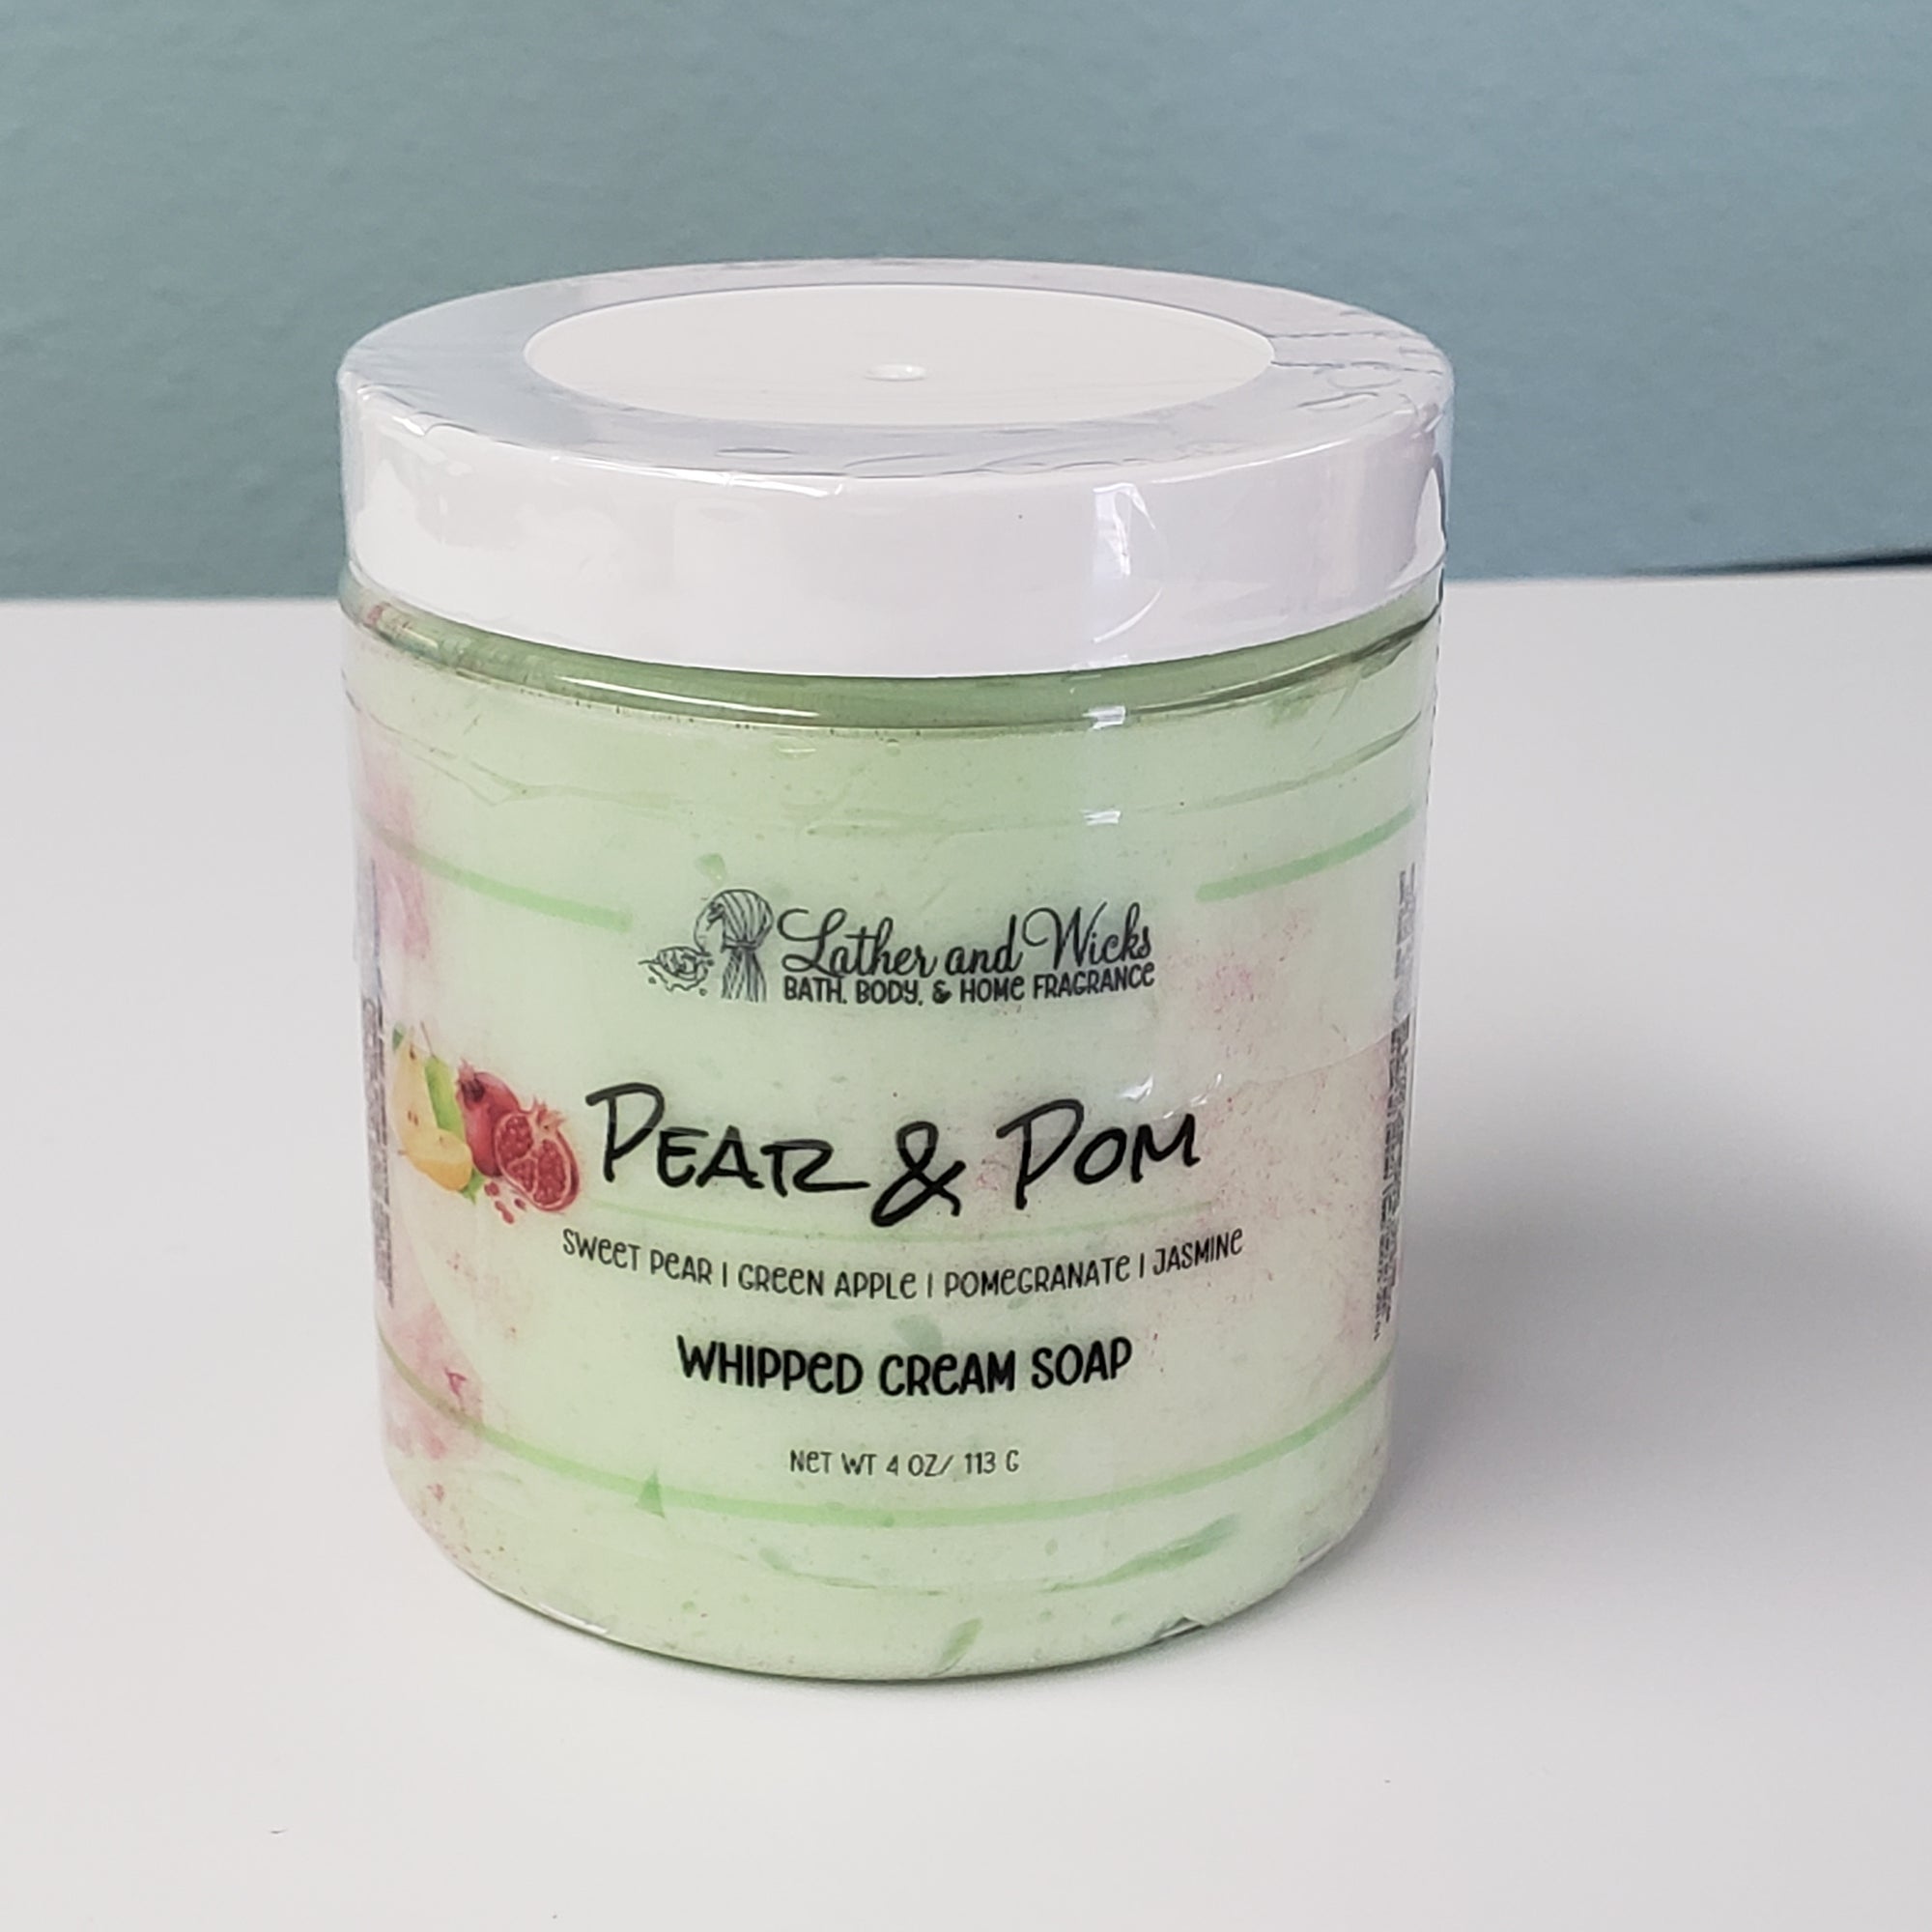 Pear and Pom 4 oz Whipped Cream Soap Lather and Wicks